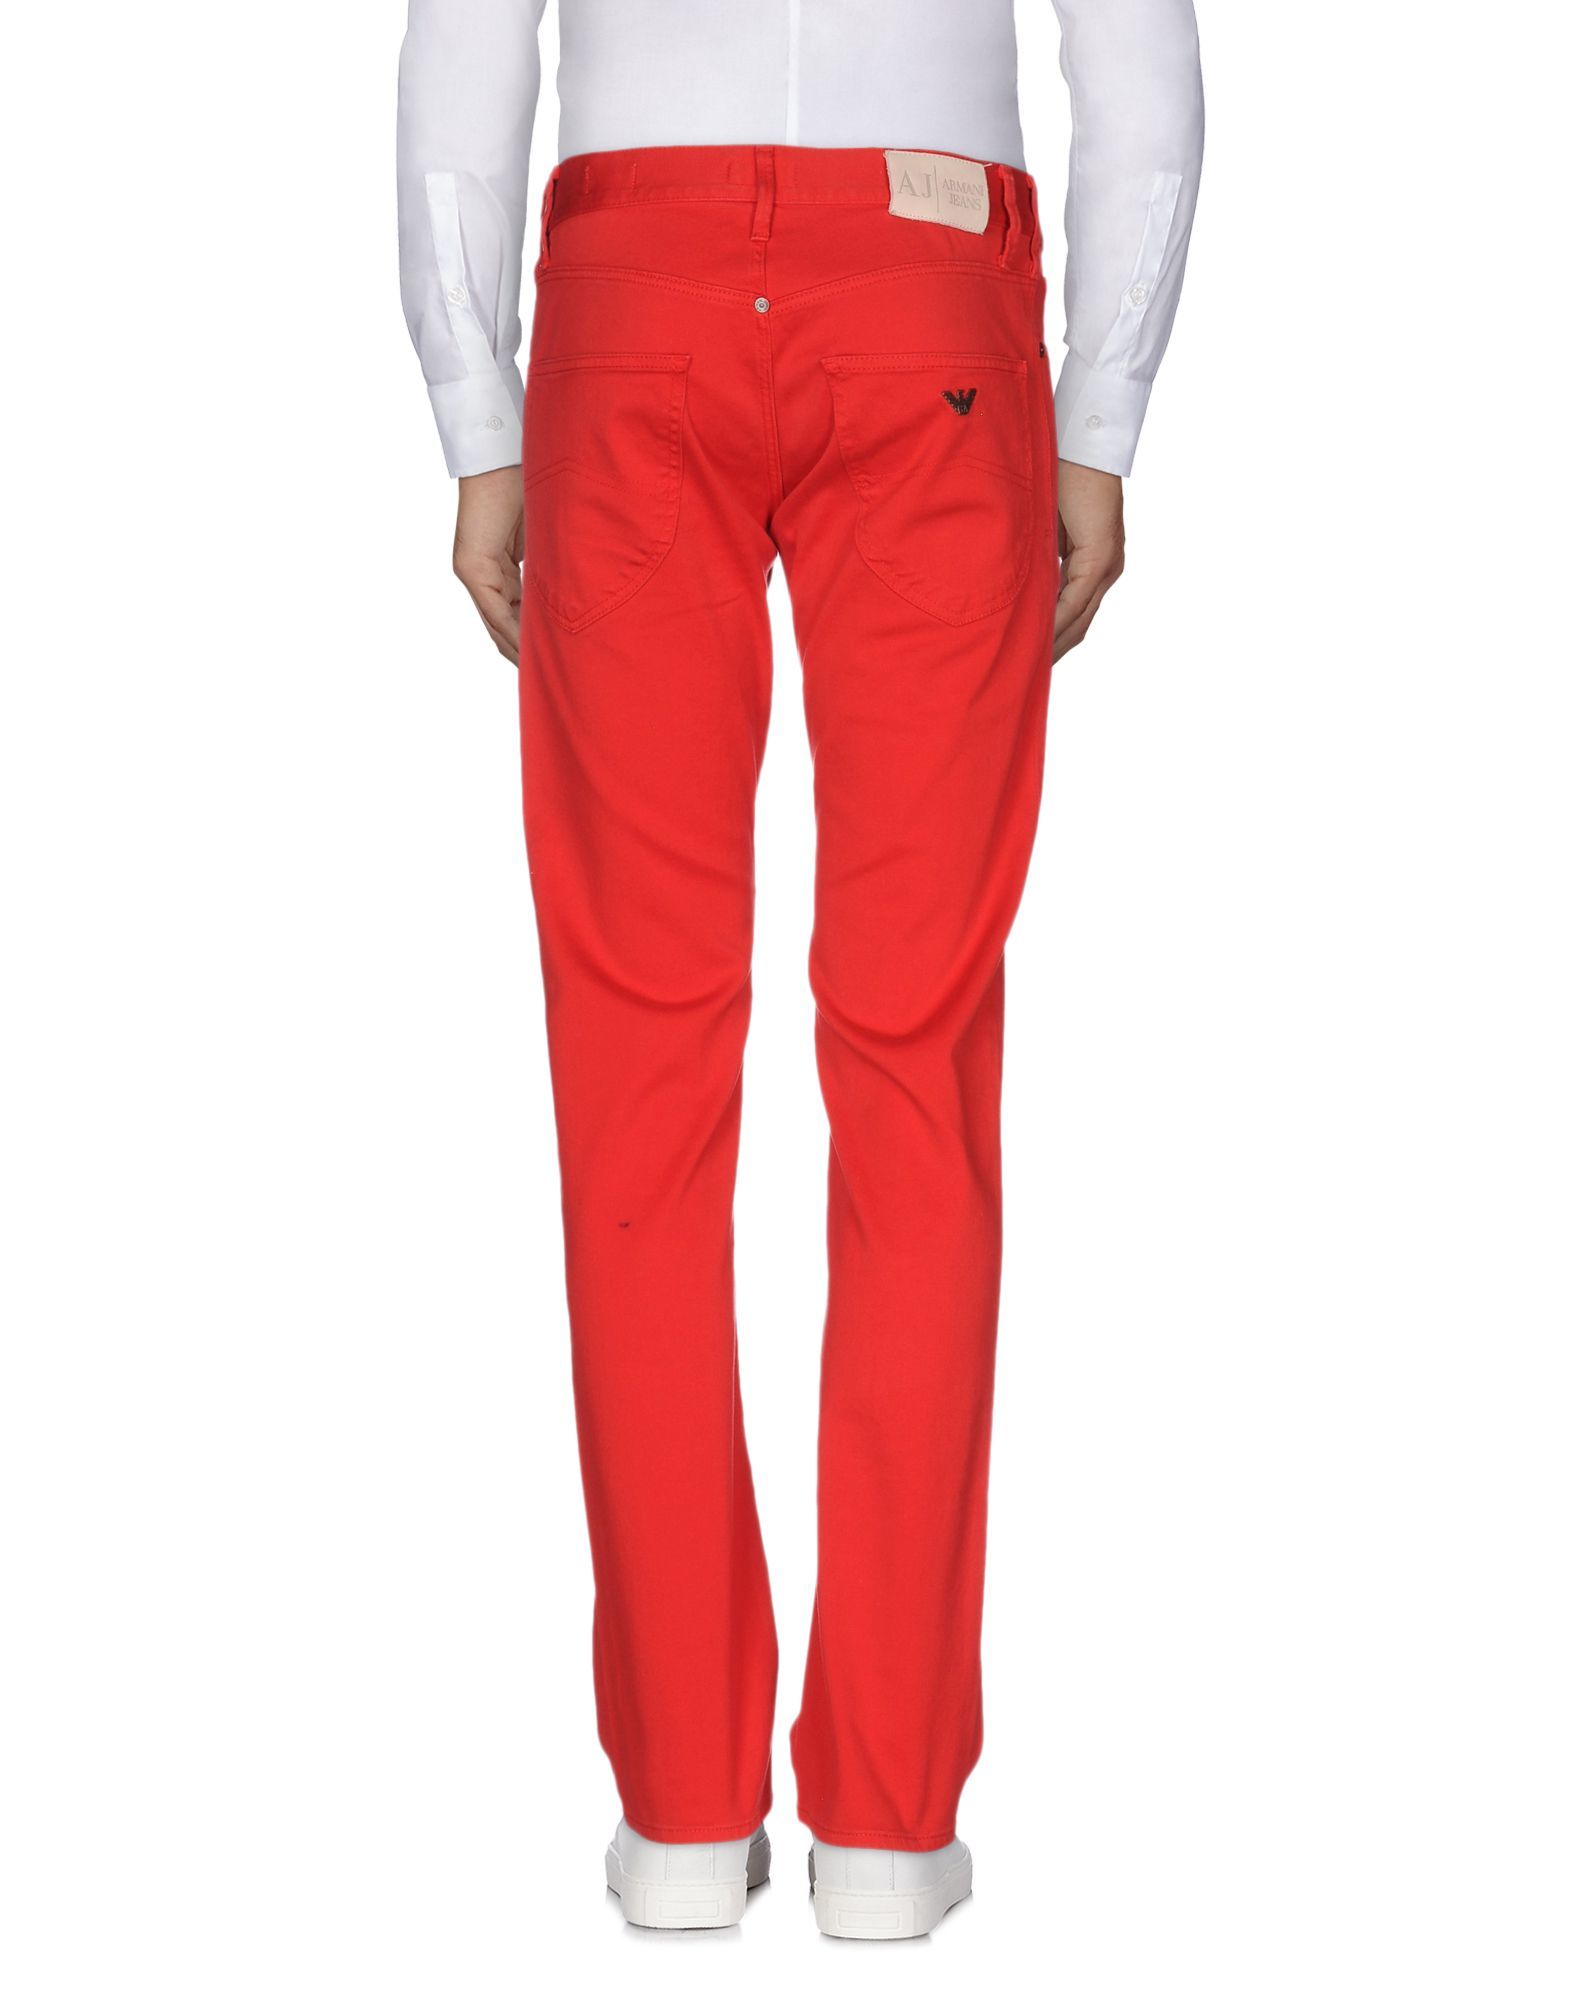 Lyst - Armani Jeans Casual Pants in Red for Men